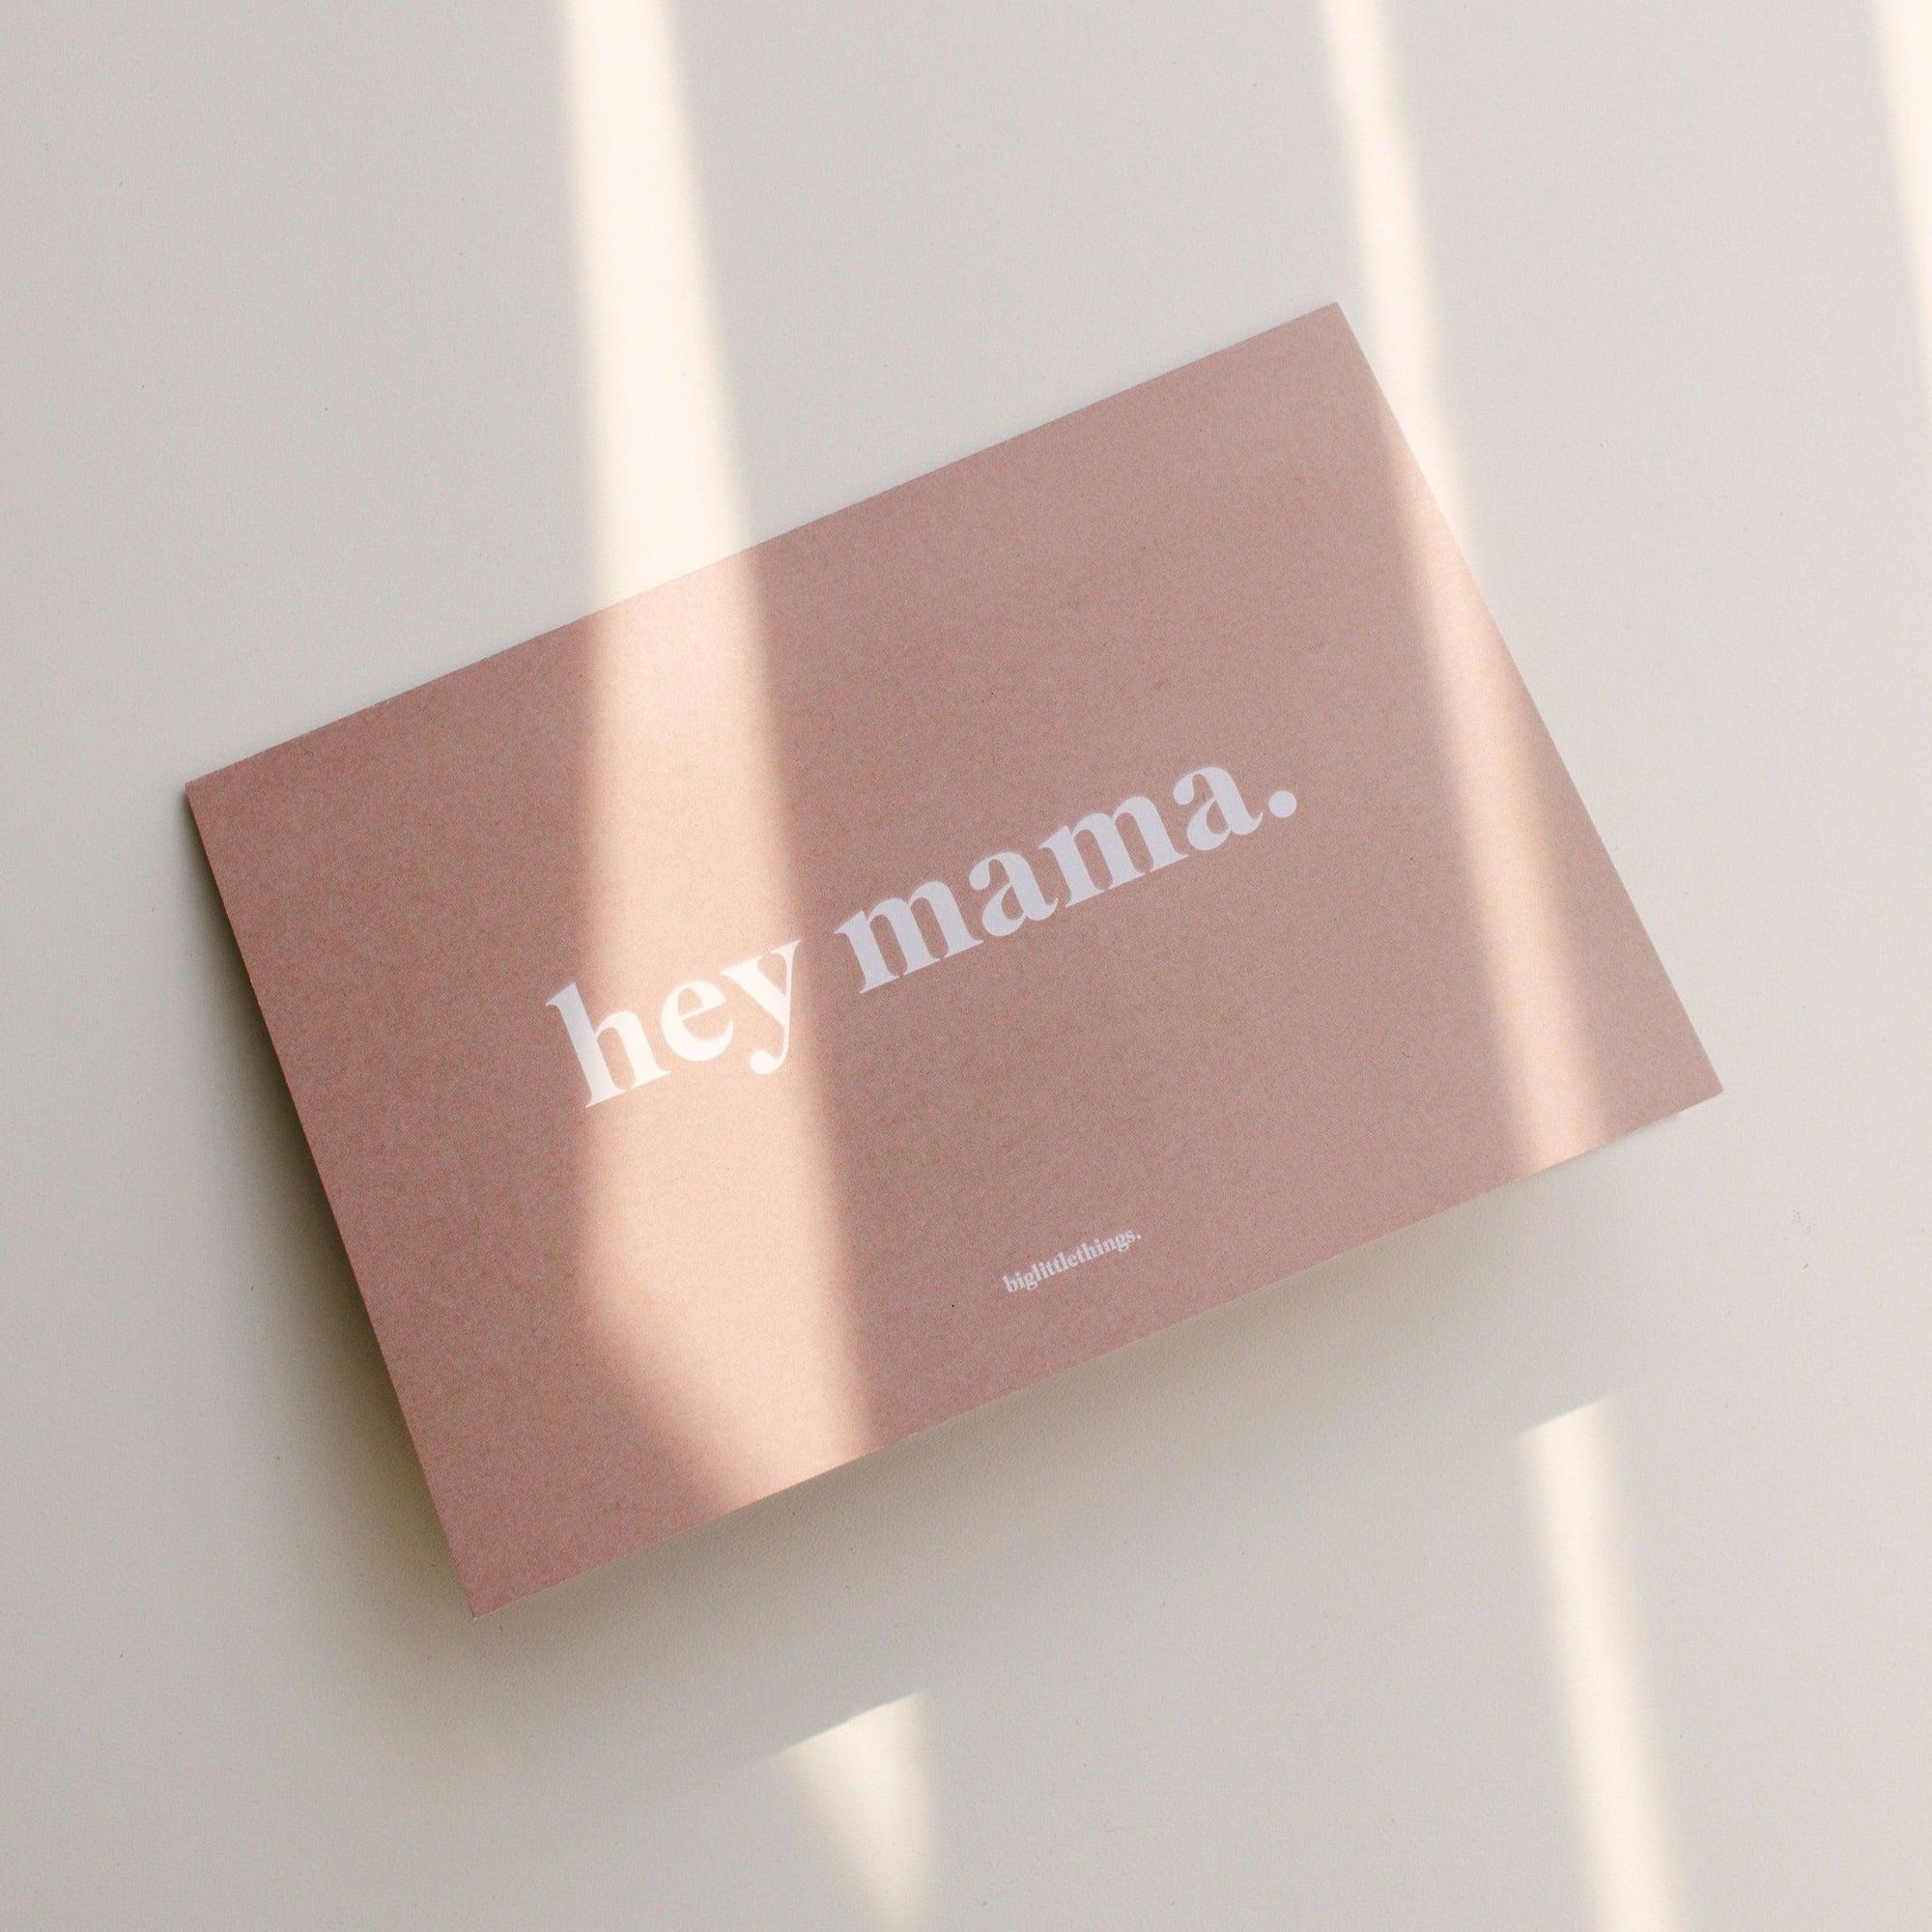 Hey mama greeting card is a perfect choice for expressing your love and appreciation to your dear mother. Whether it's her birthday, Mother's Day, or any other special occasion, this heartwarming send a gift voucher by biglittlethings.